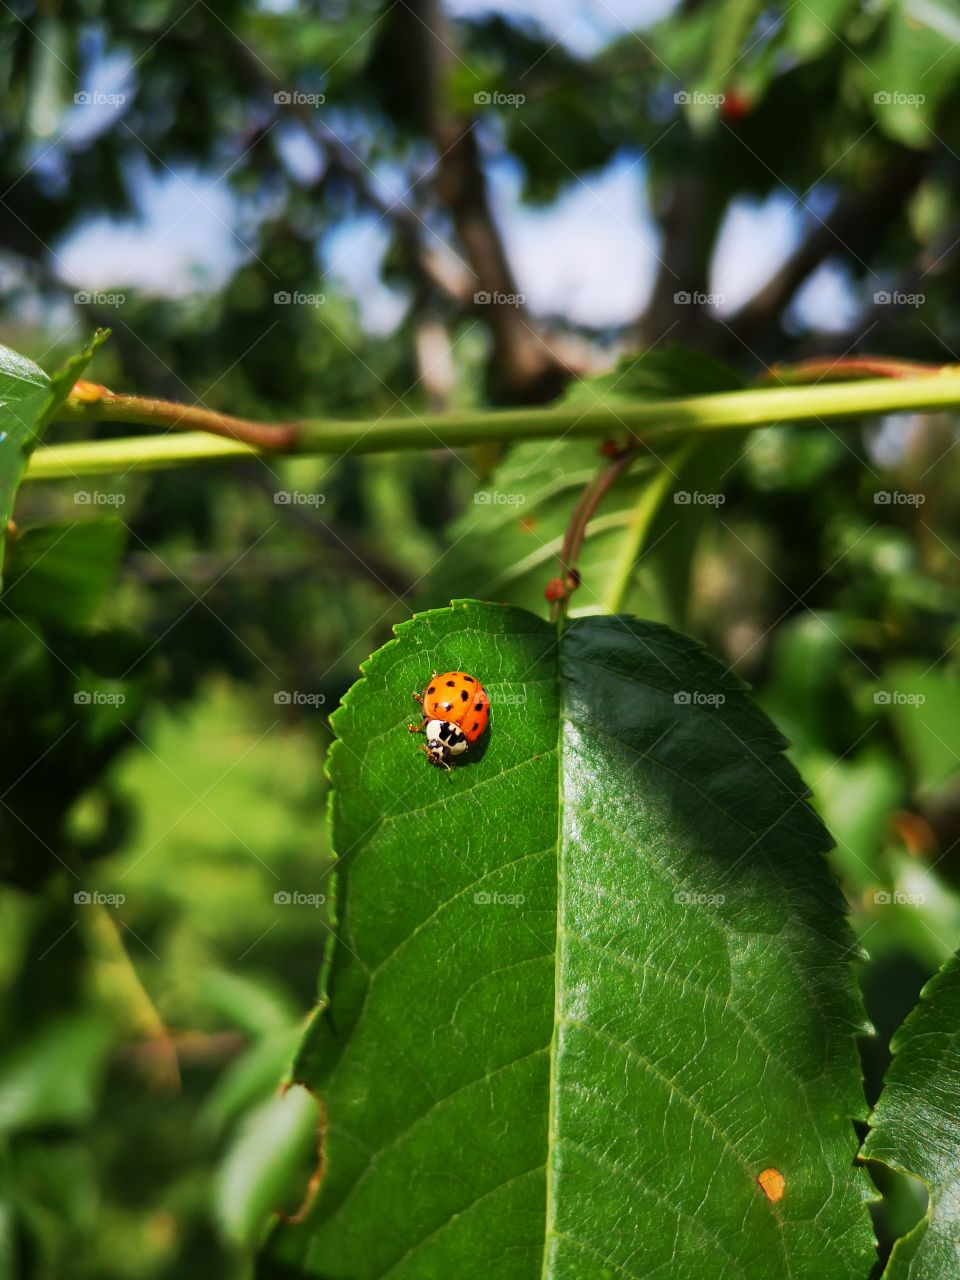 Lady bug in our garden tree leave